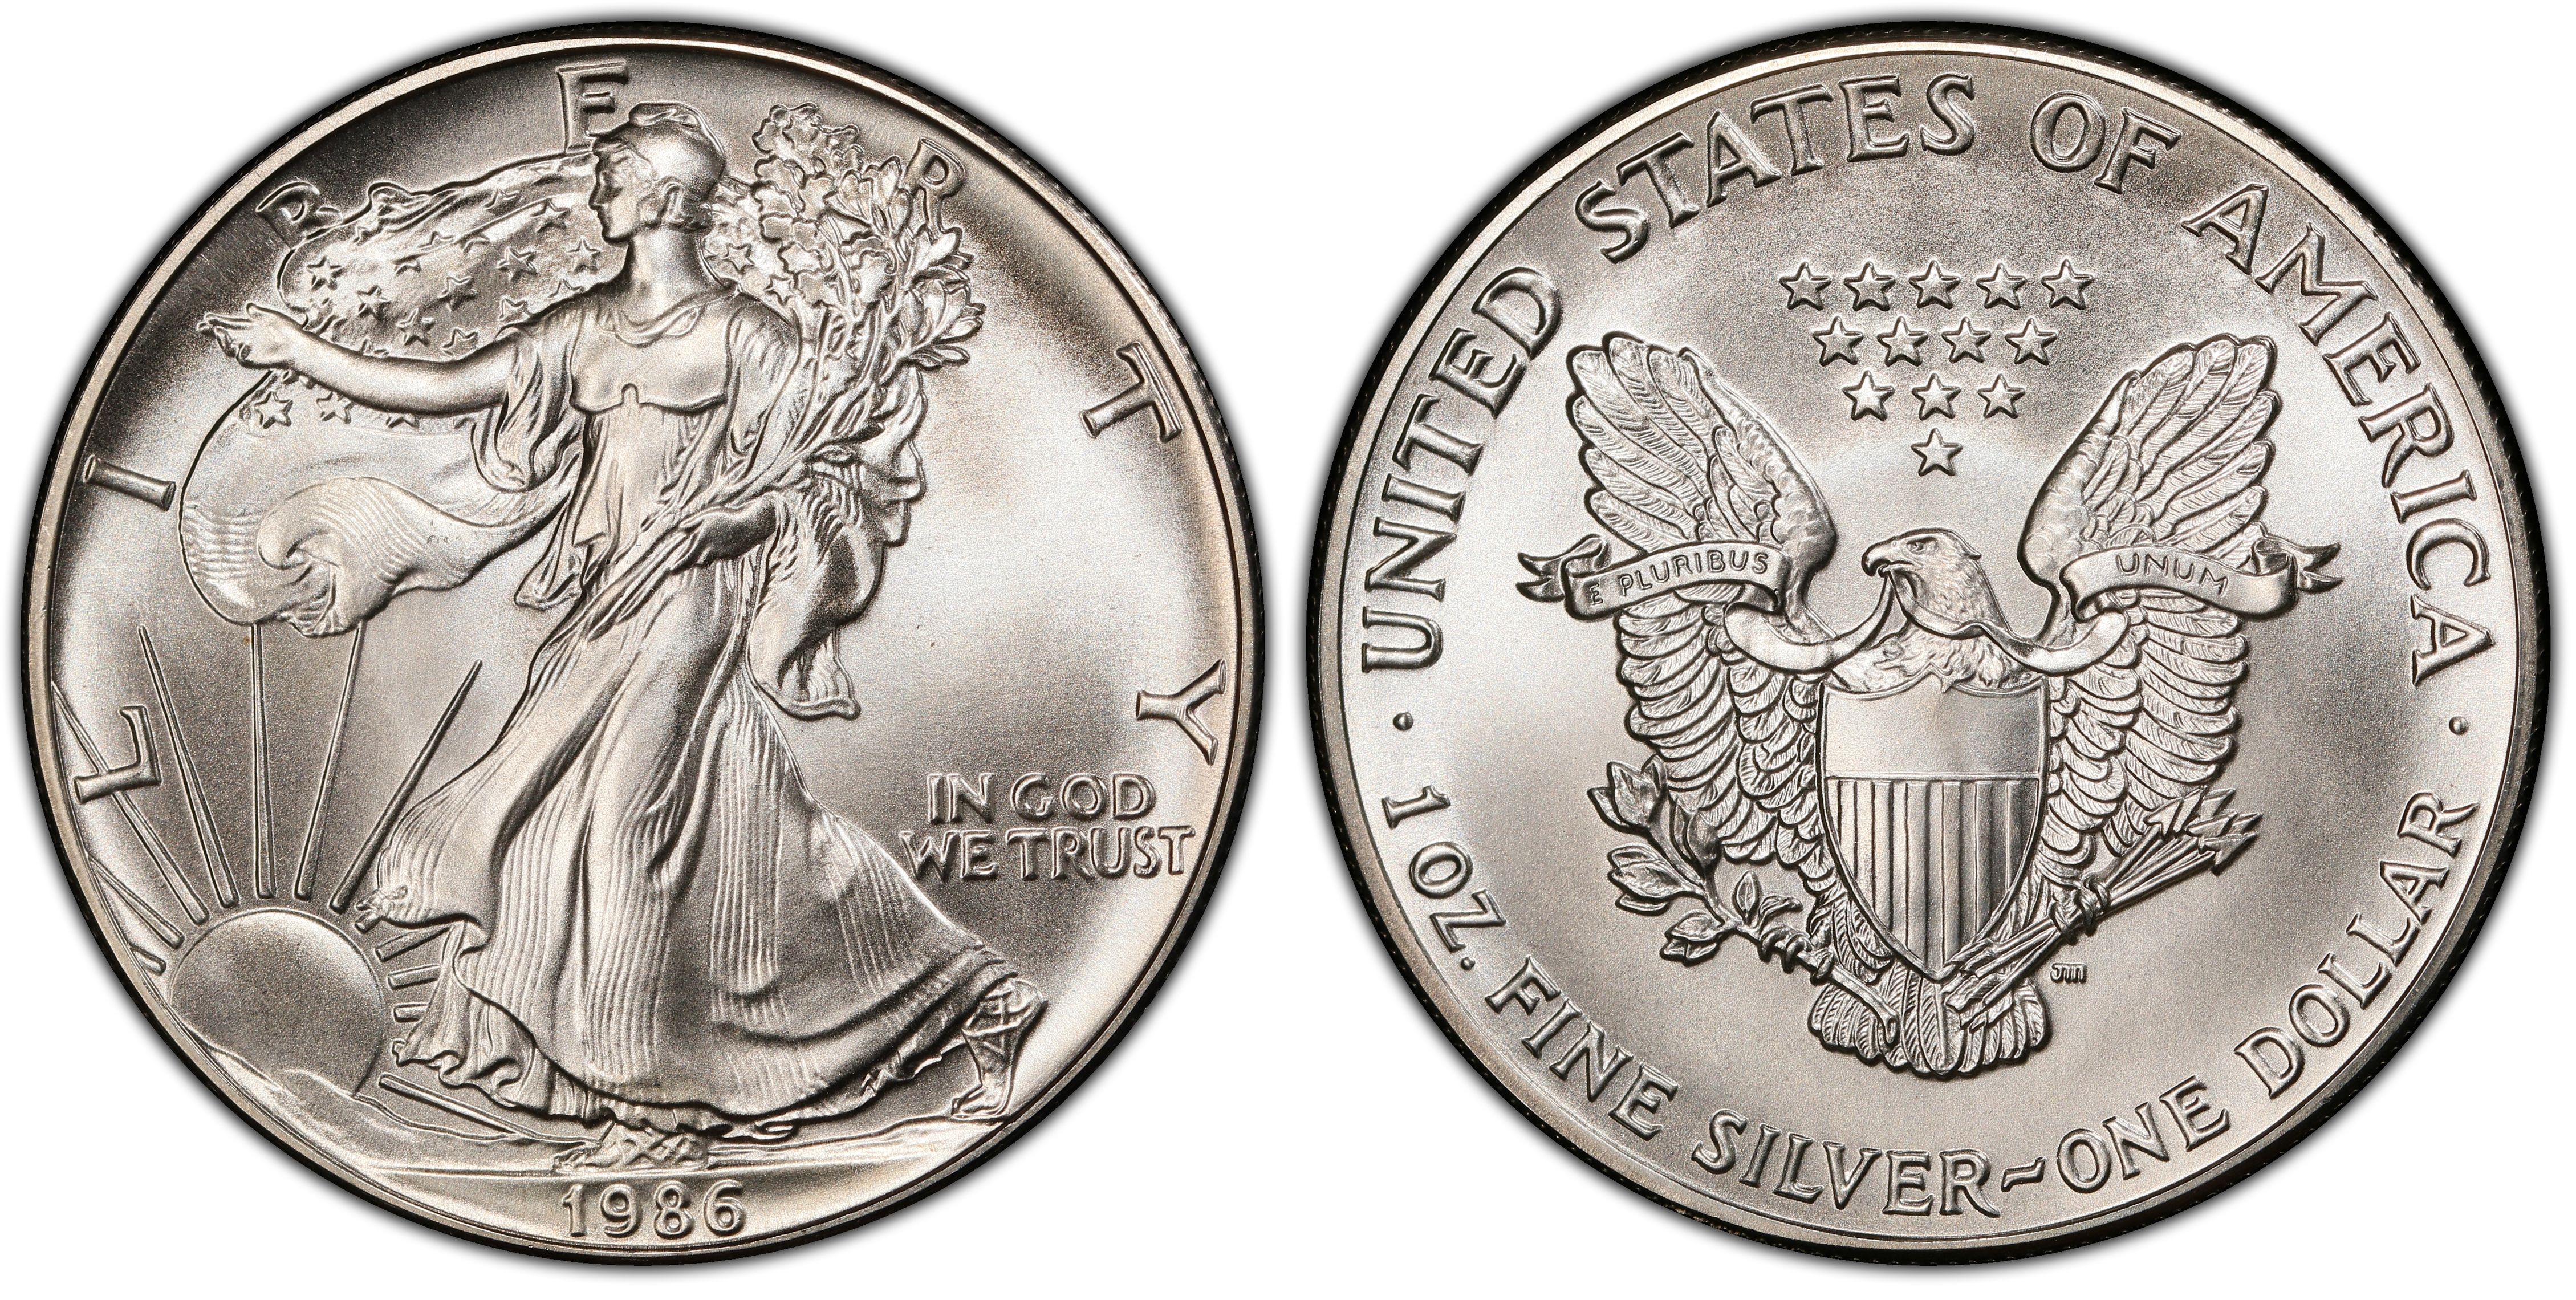 1986 $1 Silver Eagle (Regular Strike) Silver Eagles - PCGS CoinFacts